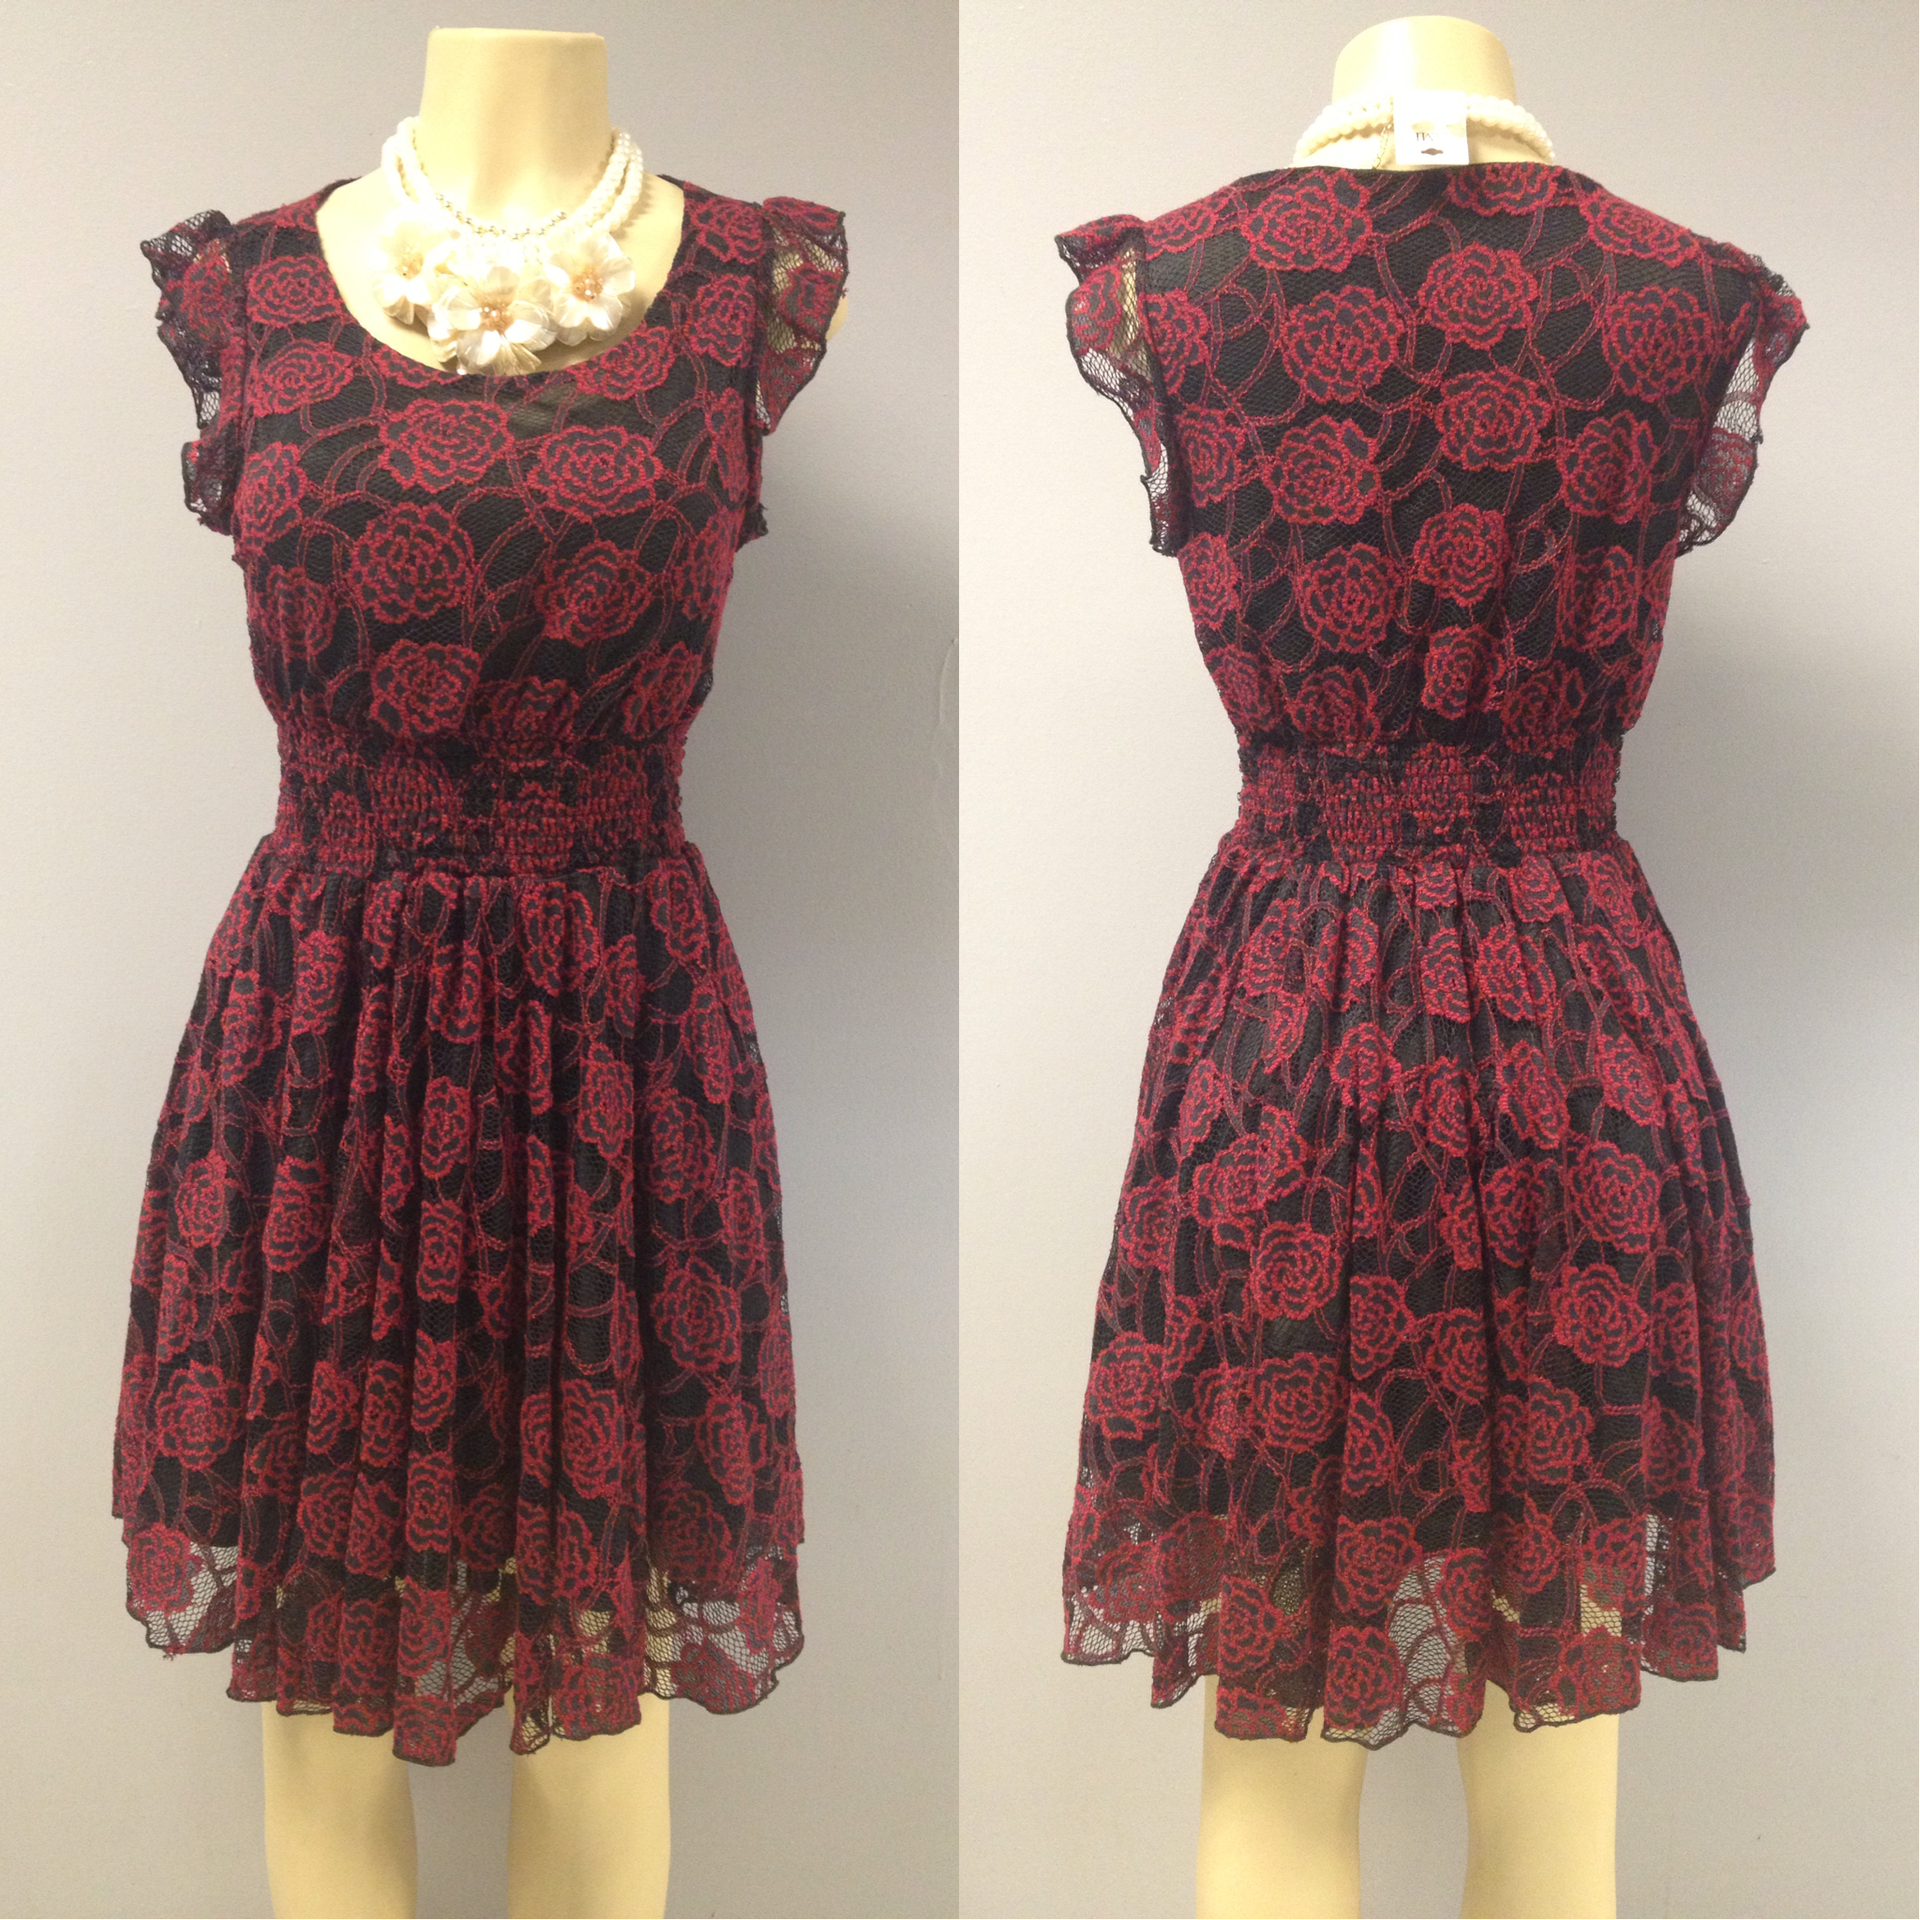 Black and cranberry color lace baby doll dress with lining underneath  sizes m, s $59